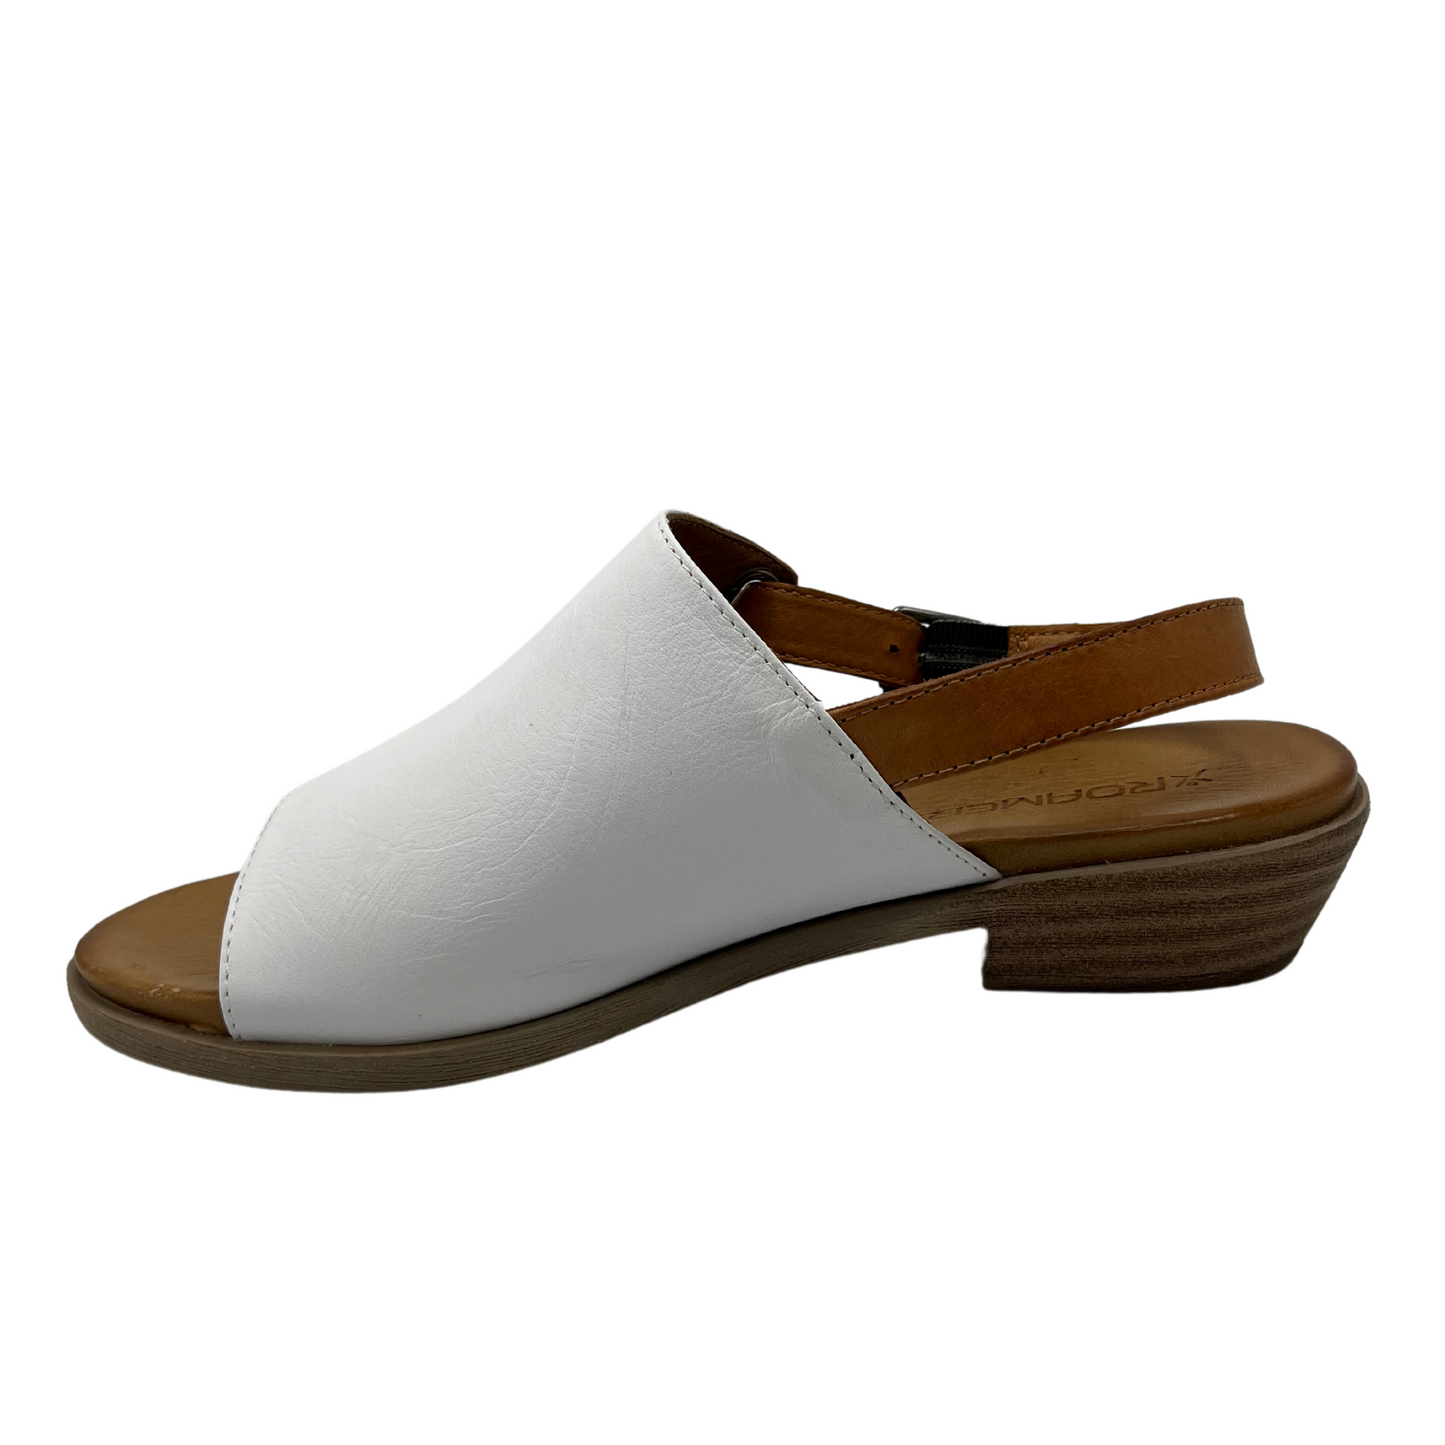 Left facing view of white leather sandal with brown strap and low heel